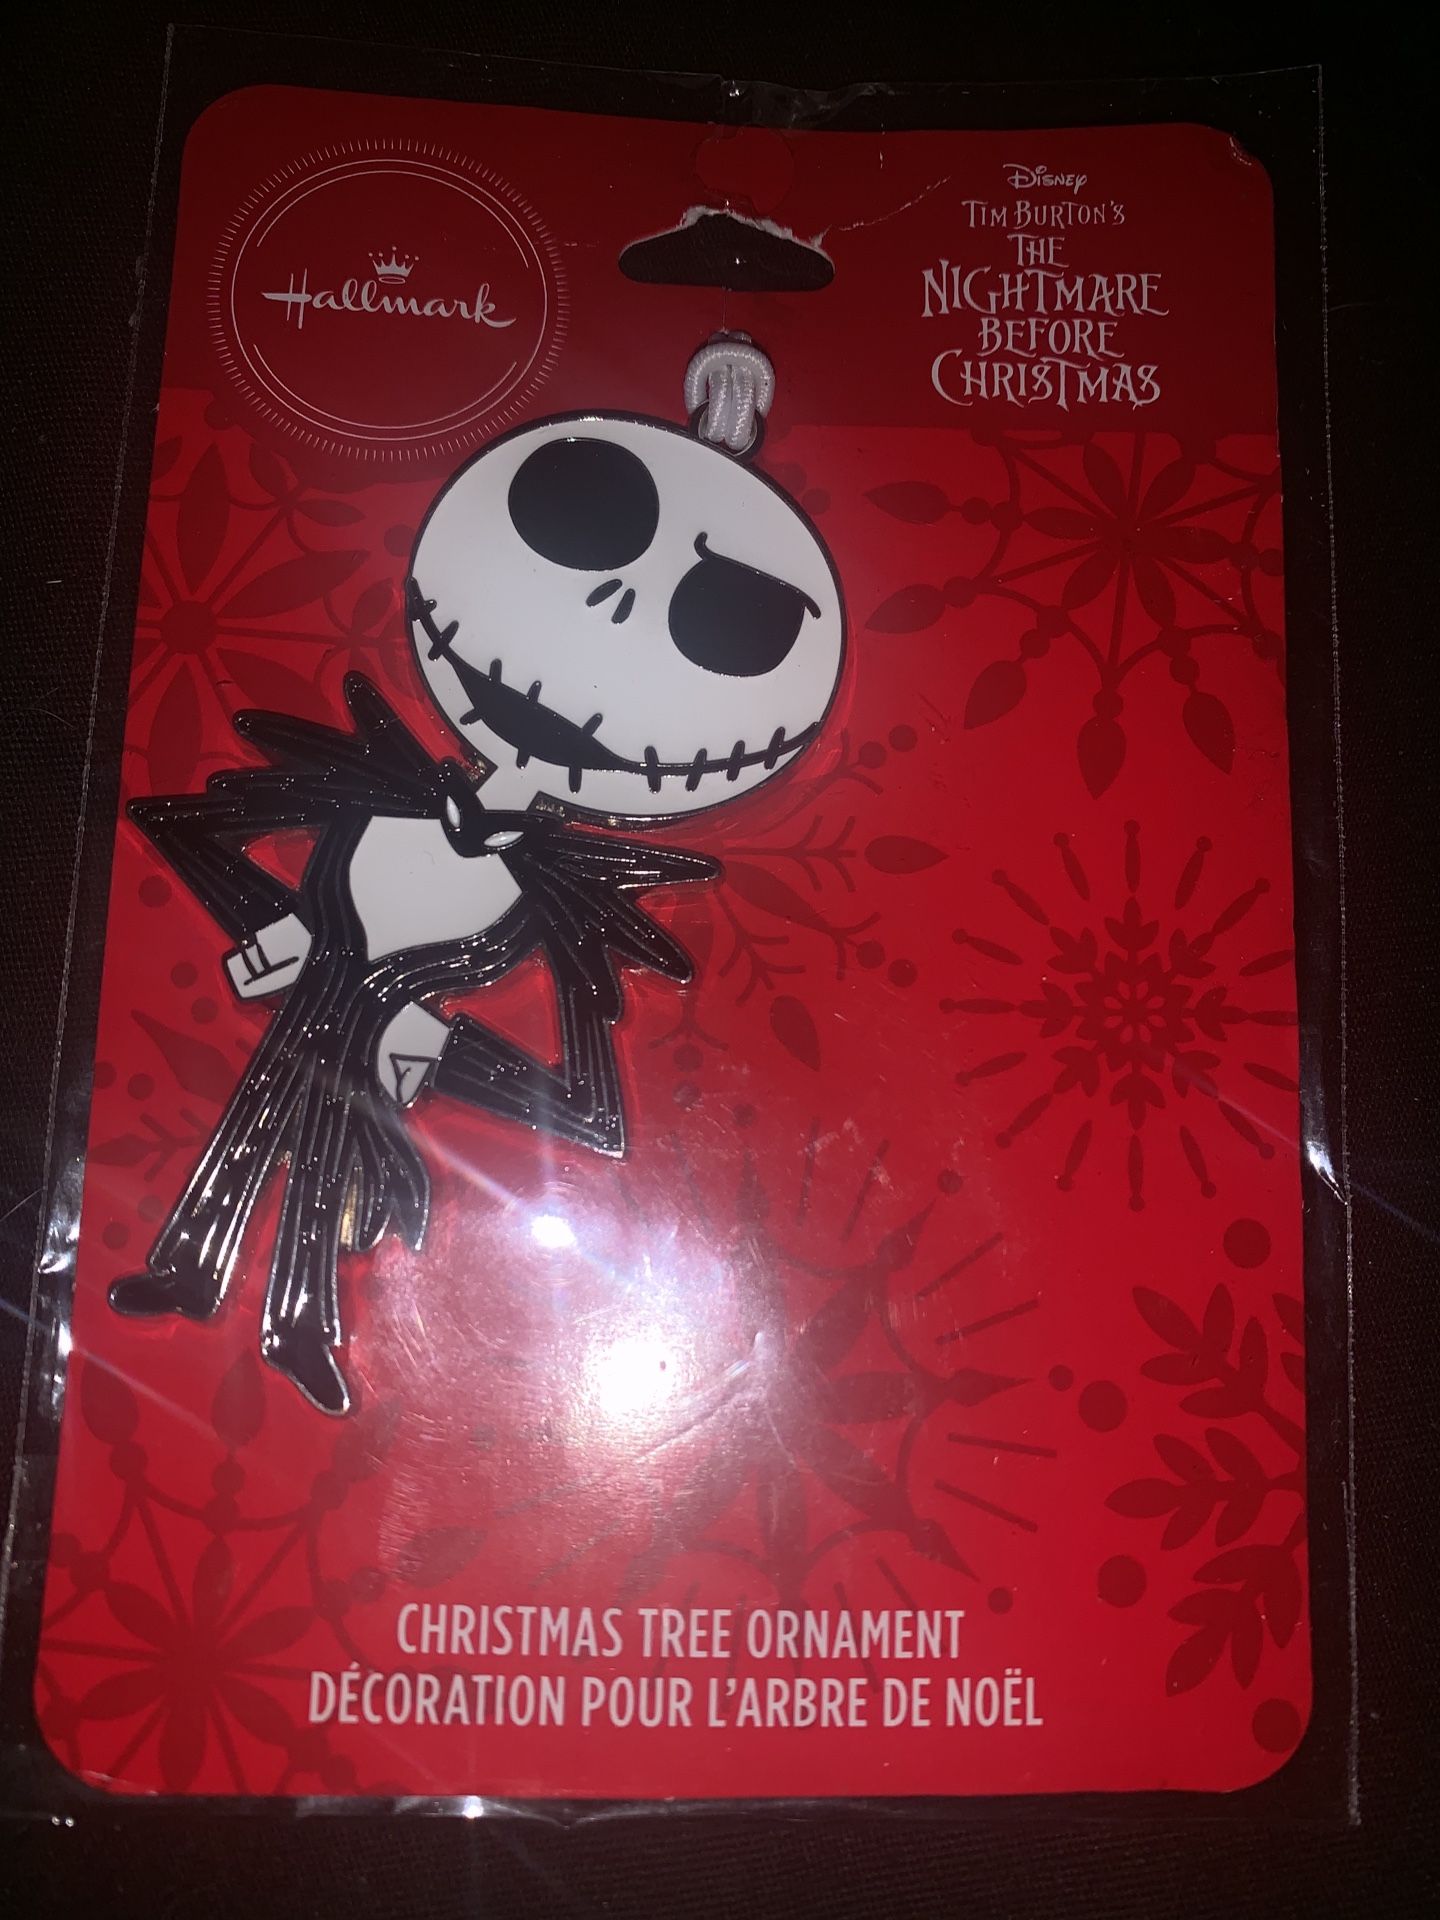 The nightmare before Christmas’s ornament